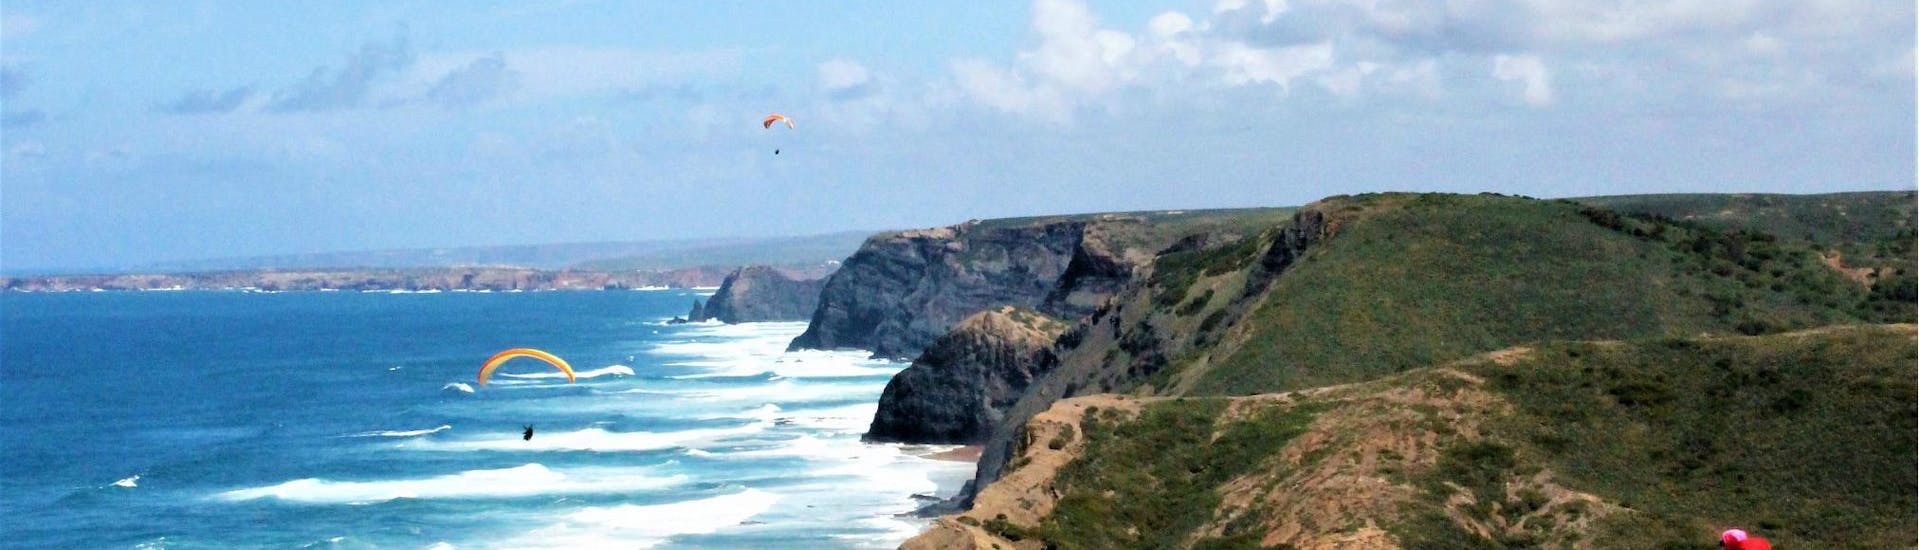 Two paragliders are soaring high above the beach where Flytrip offers their Tandem Paragliding at Praia da Cordoama.